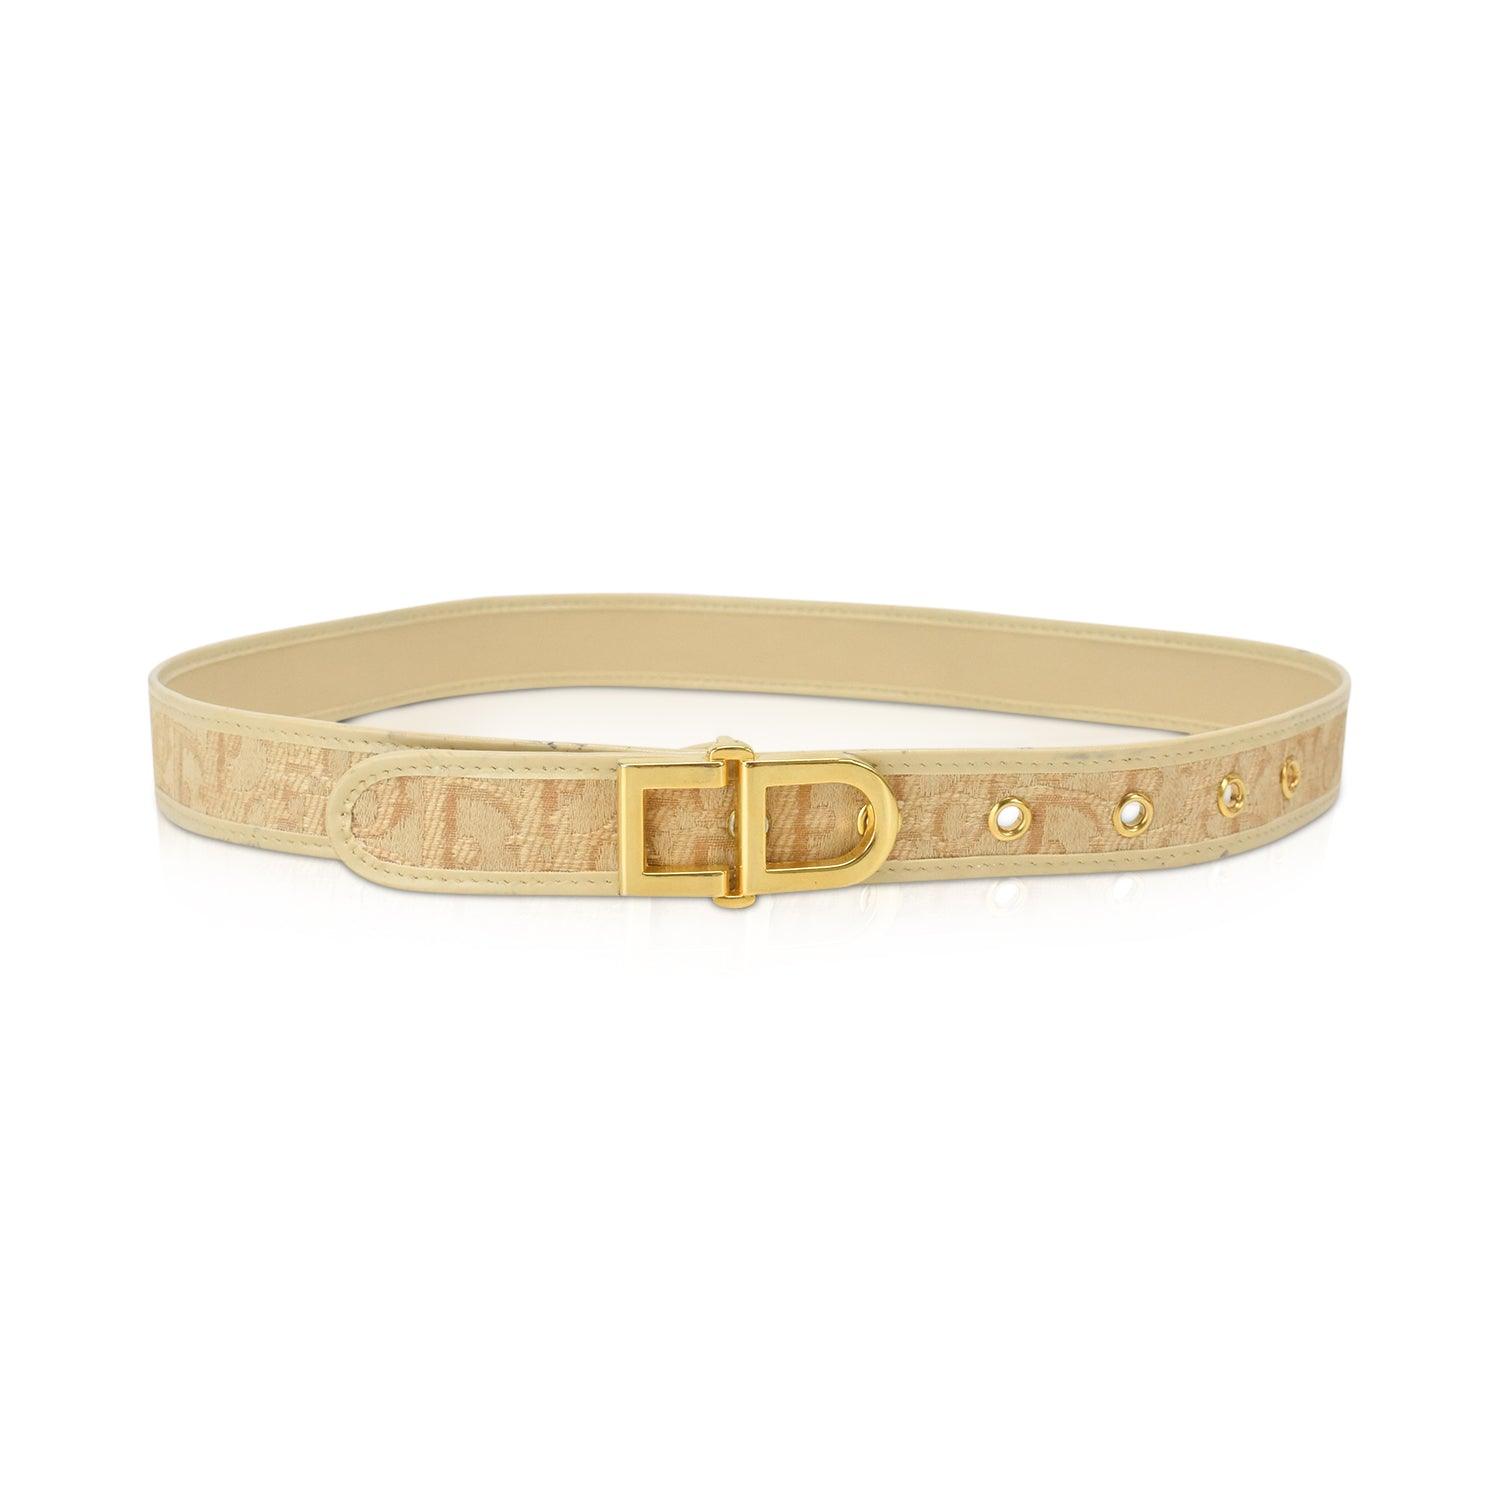 Christian Dior Belt - 70 - Fashionably Yours